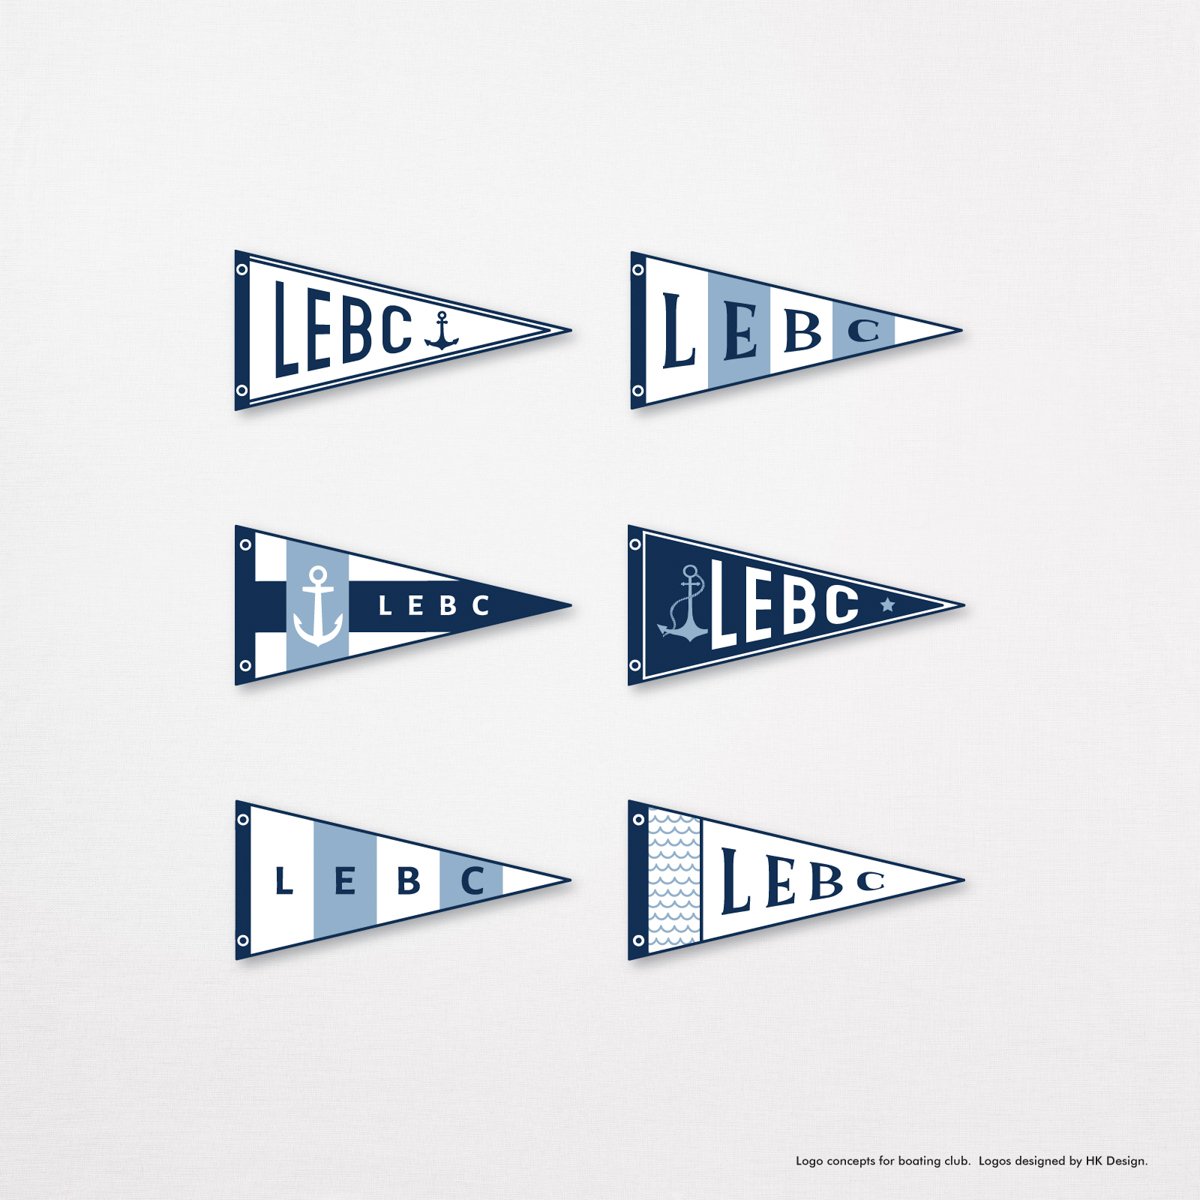 Logo concepts for Lake Erie Boat Club.